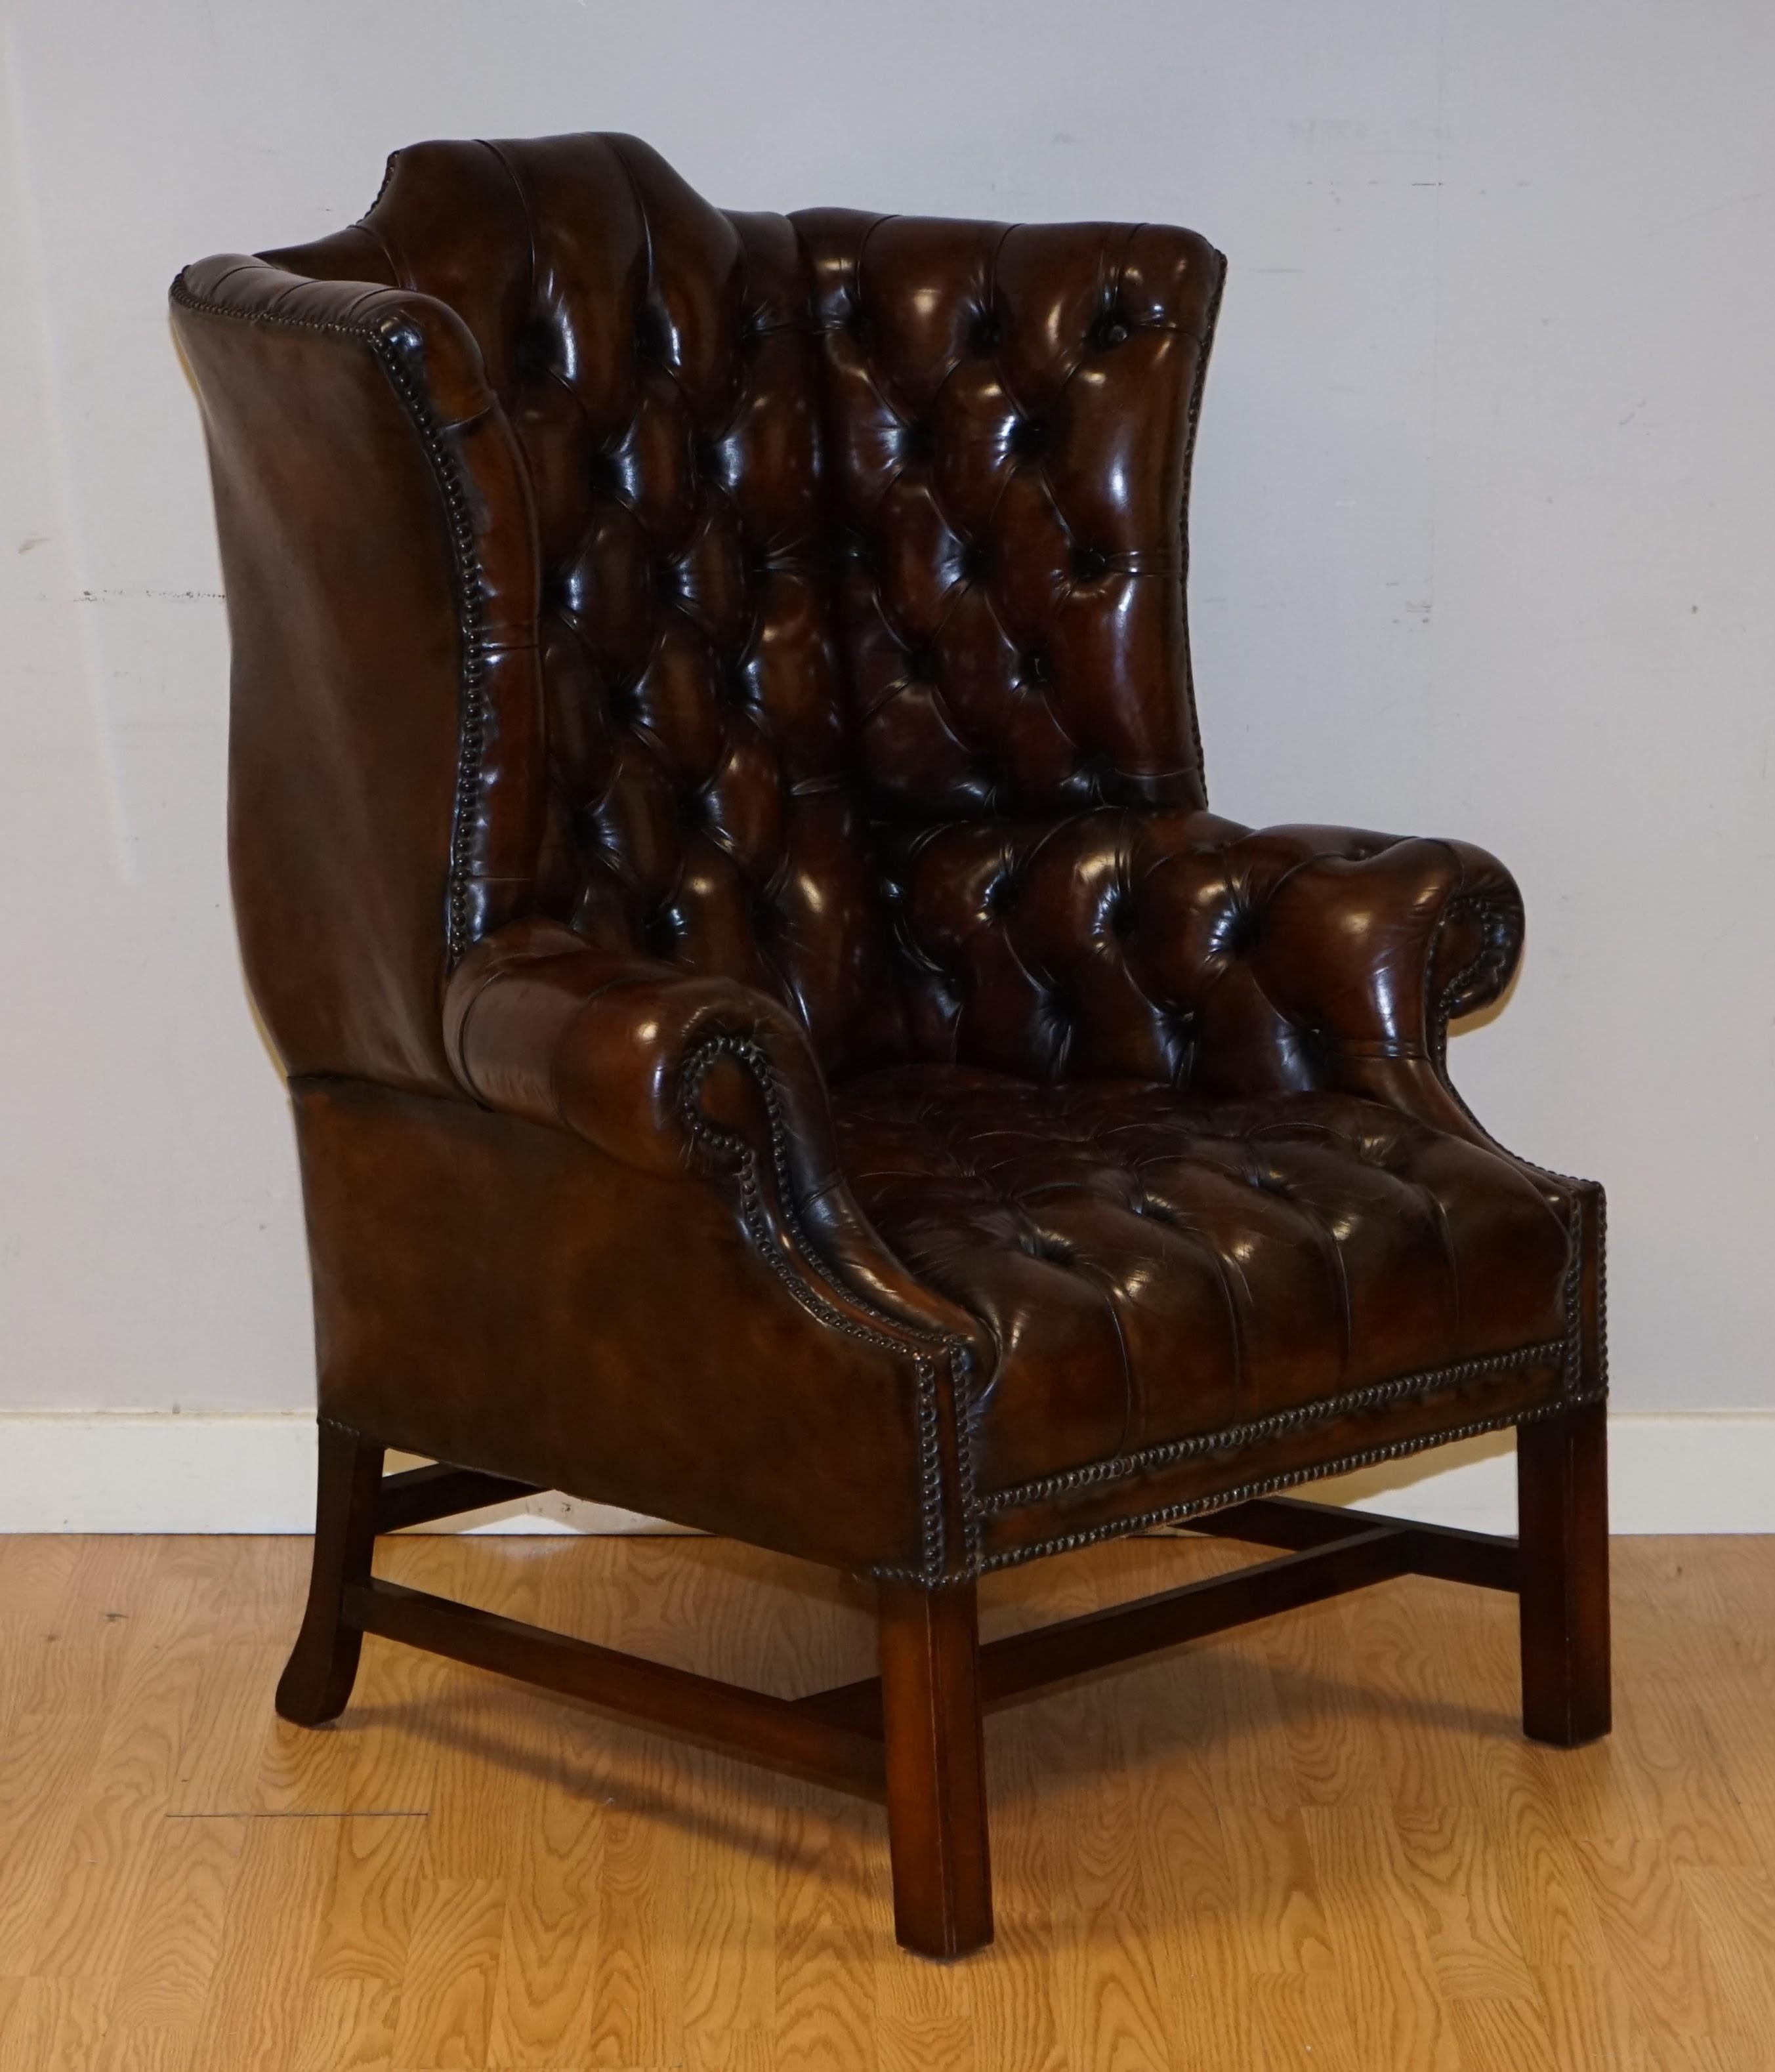 We are delighted to offer this Fully Restored Pair of Georgian H framed Fully Buttoned Chesterfield Wingback Chairs.
These are a very well made pair. Made traditionally with a coil sprung seat. It's called a H frame because if you lay the chair on